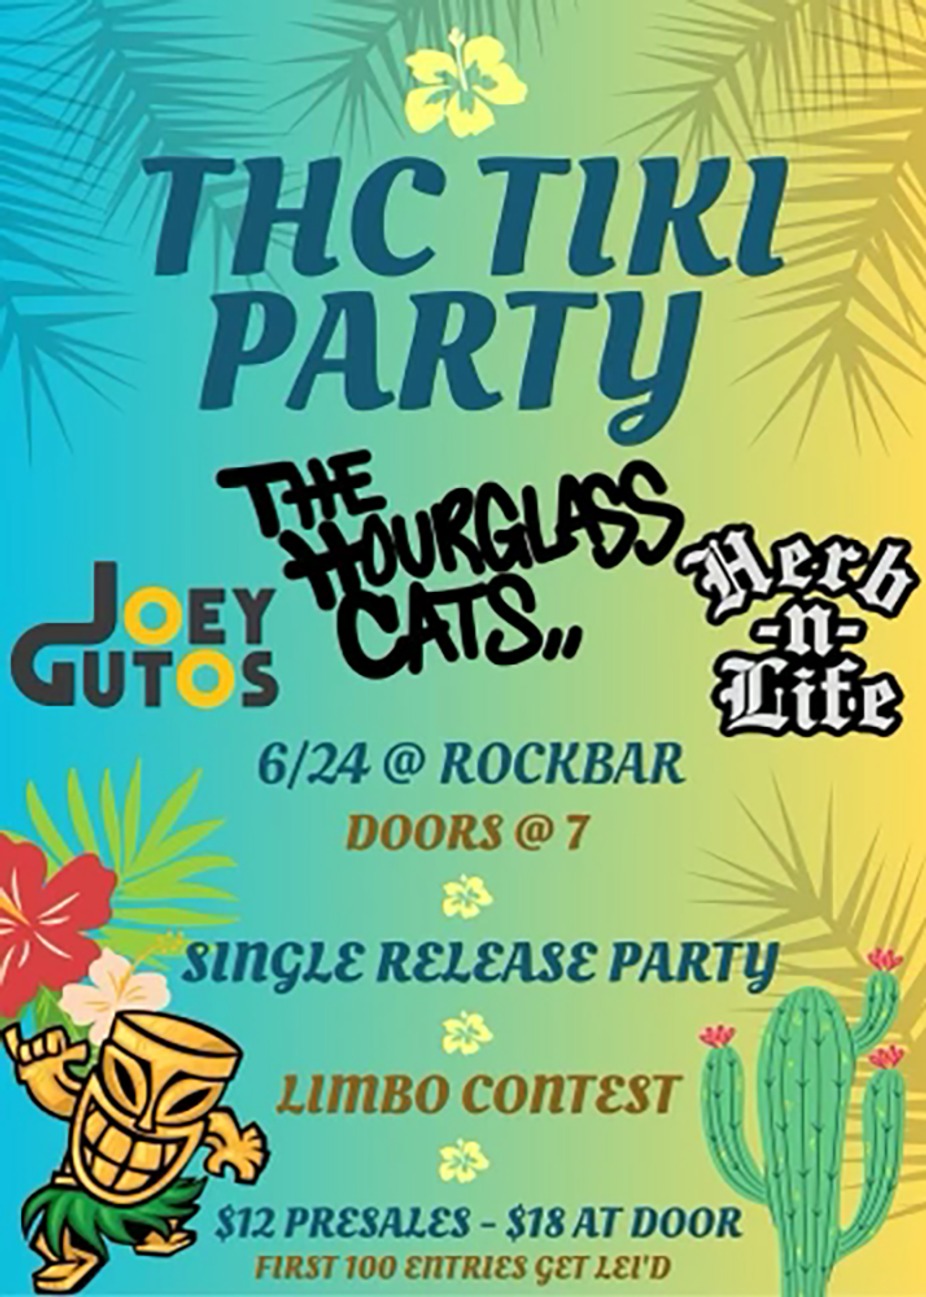 THC Tiki Party W/ The Hourglass Cats, HerbNLife & Joey Gutos event photo